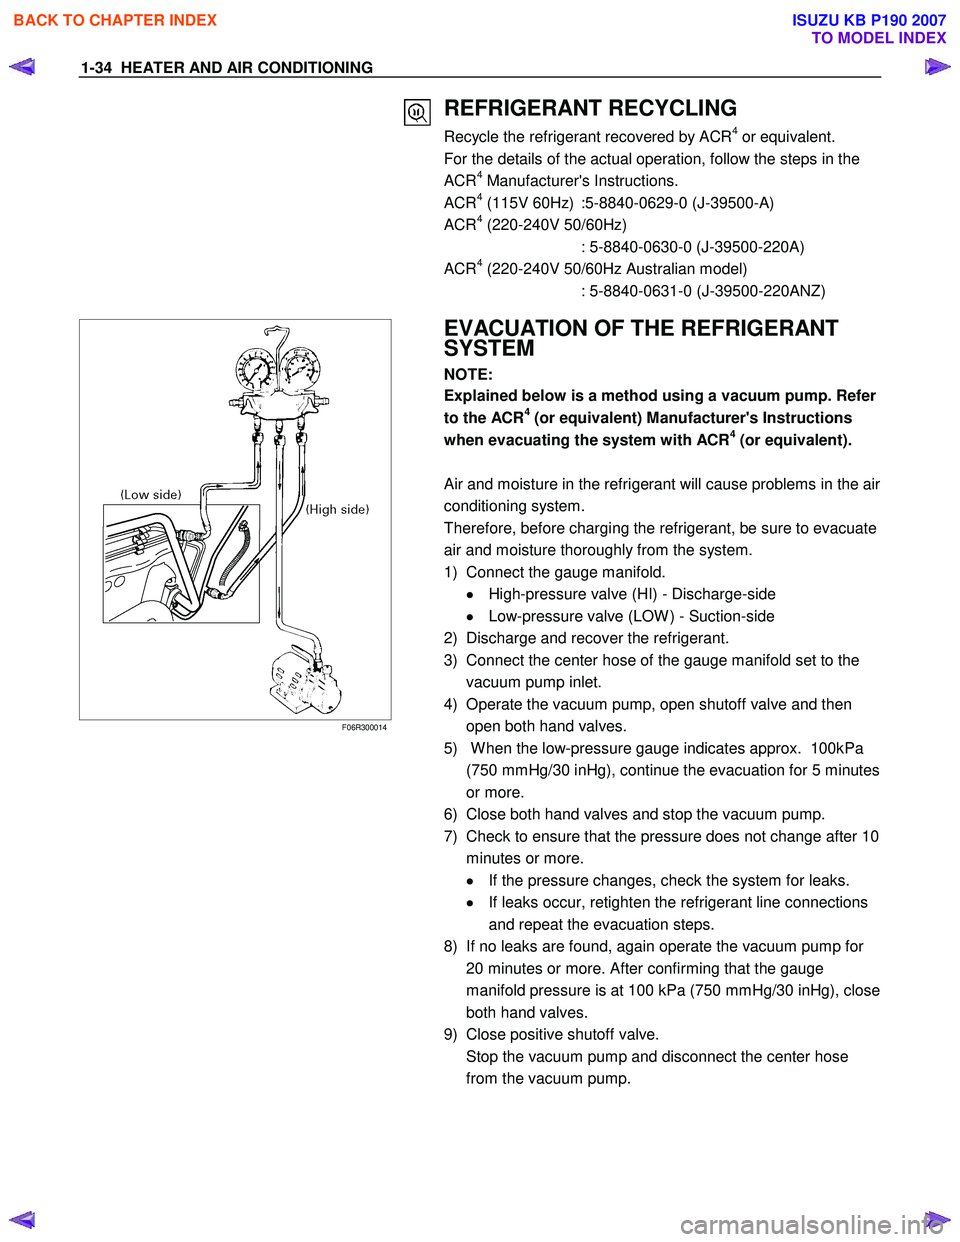 ISUZU KB P190 2007  Workshop Repair Manual 1-34  HEATER AND AIR CONDITIONING 
  
 REFRIGERANT RECYCLING 
Recycle the refrigerant recovered by ACR4 or equivalent. 
For the details of the actual operation, follow the steps in the  
ACR
4 Manufac